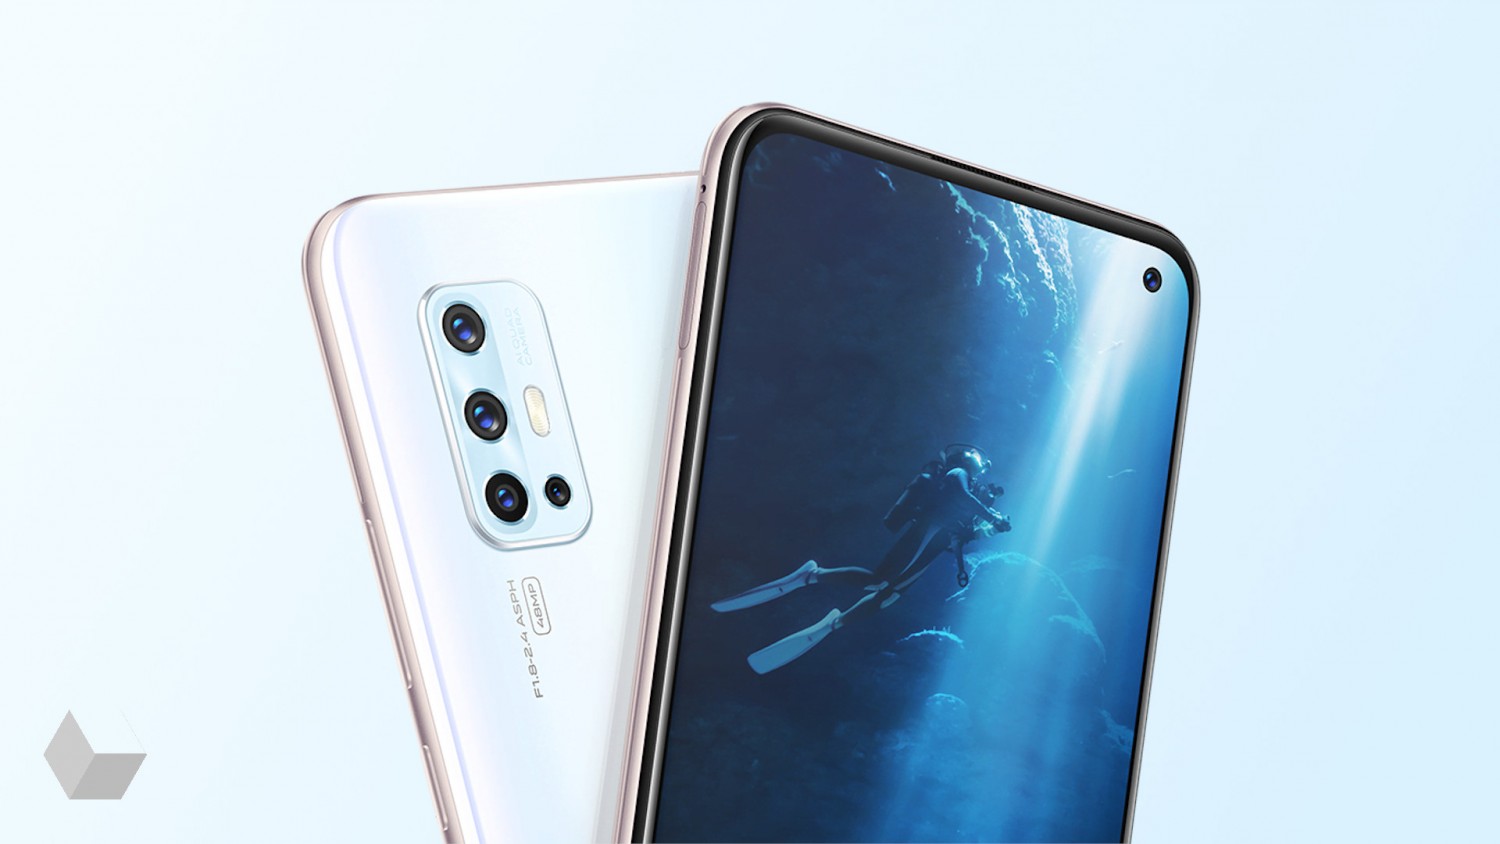 Review of the Vivo V19 smartphone with all the characteristics